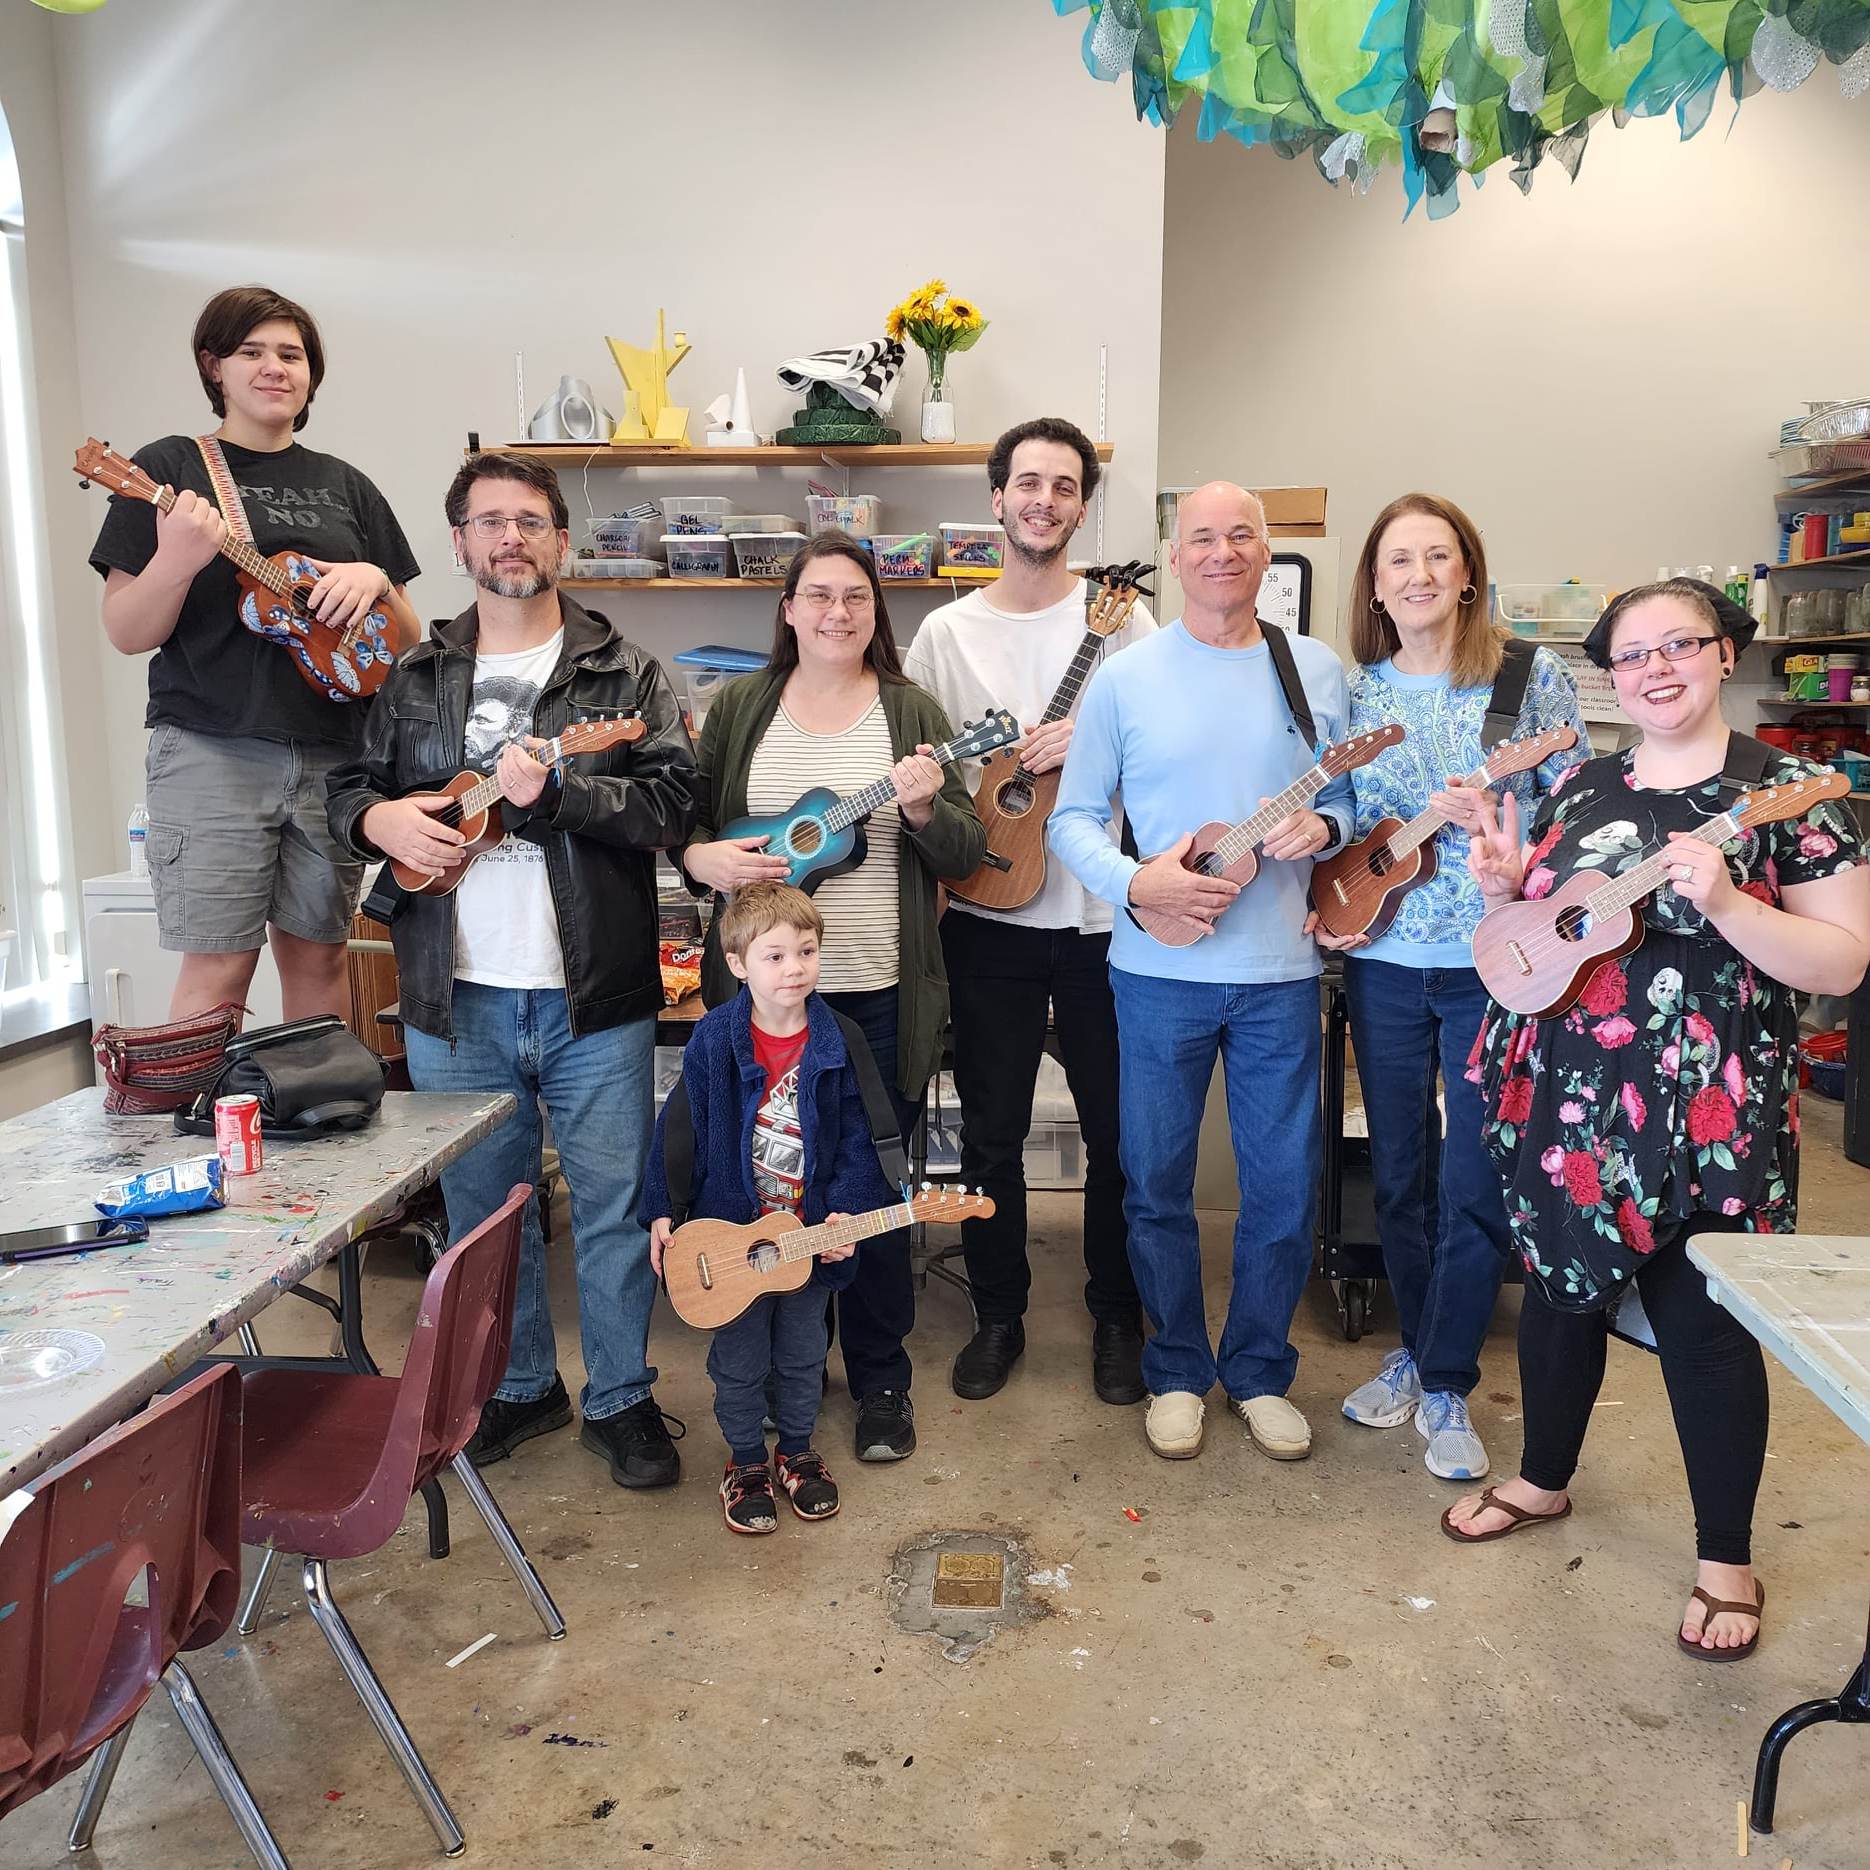 8 people of various ages standing in a row smiling and holding ukuleles